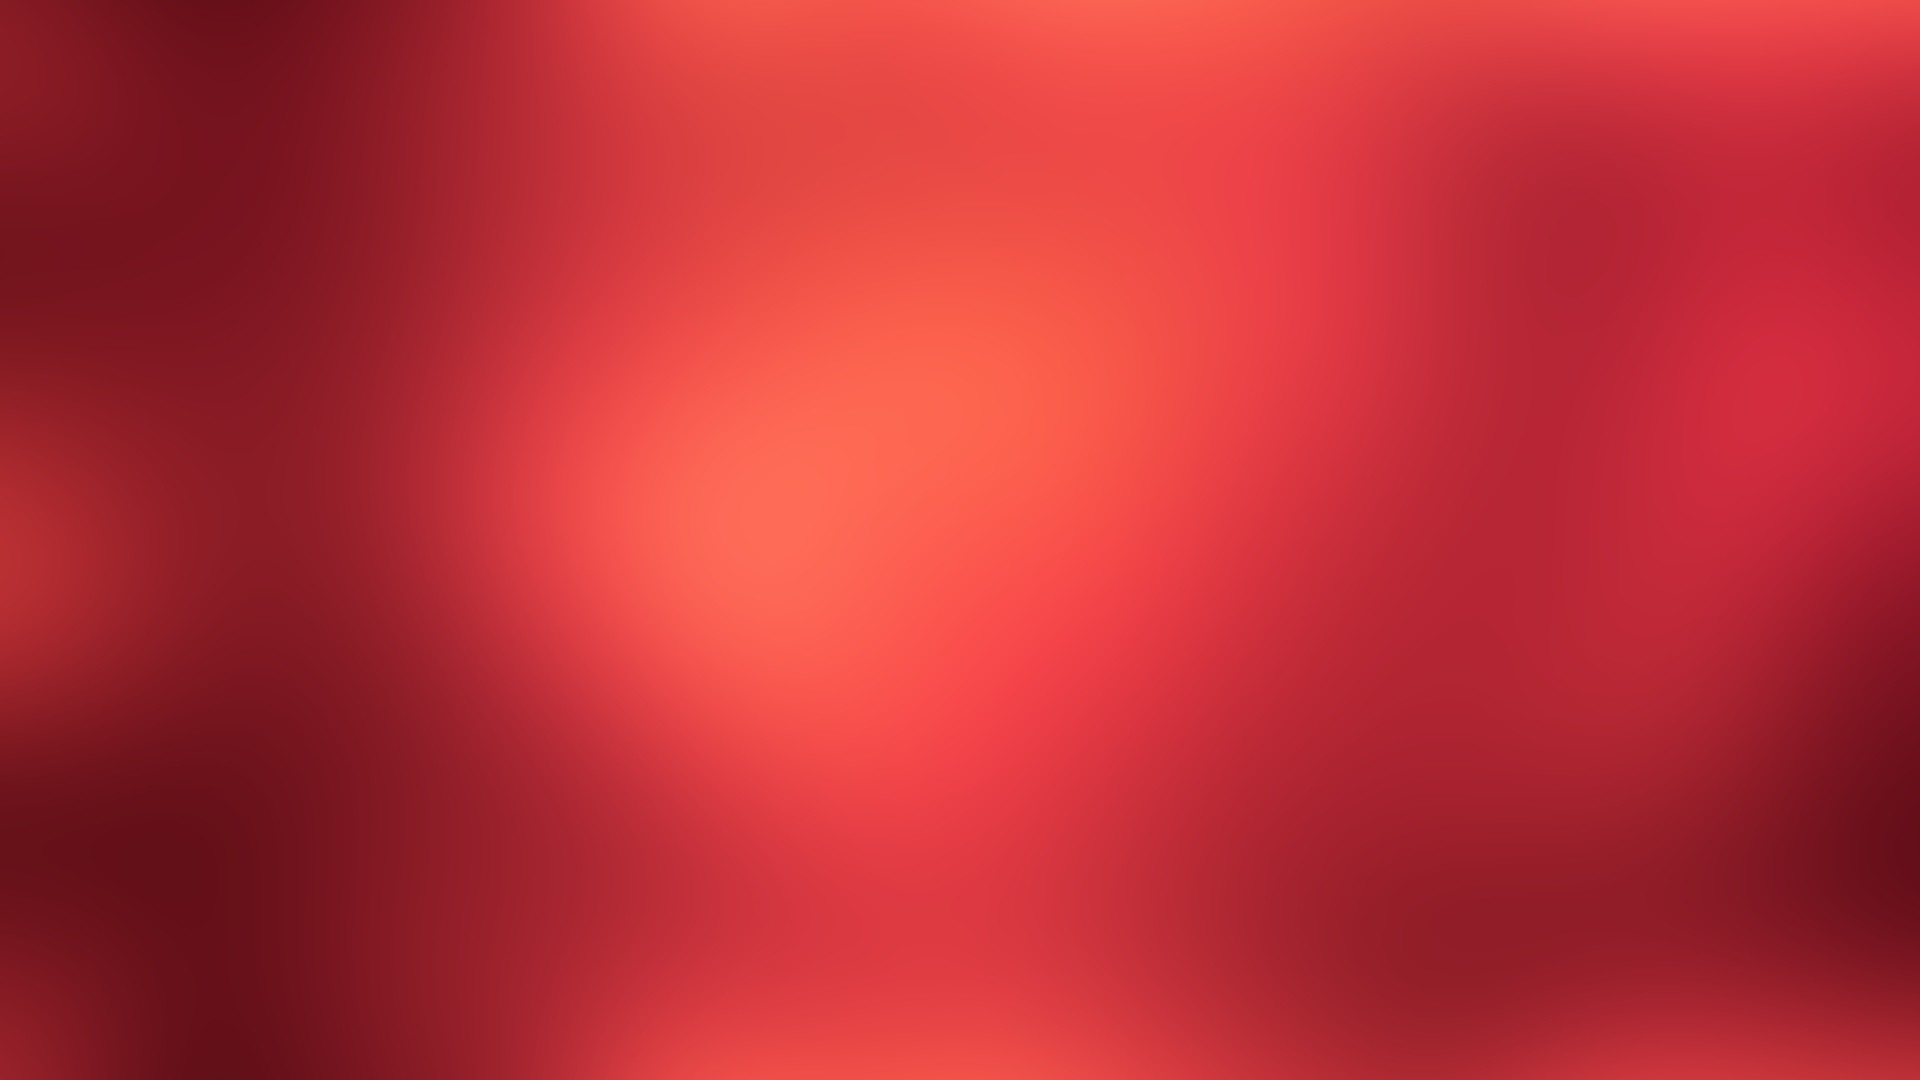 Download Wallpaper solid, red, bright, shiny Full HD 1080p